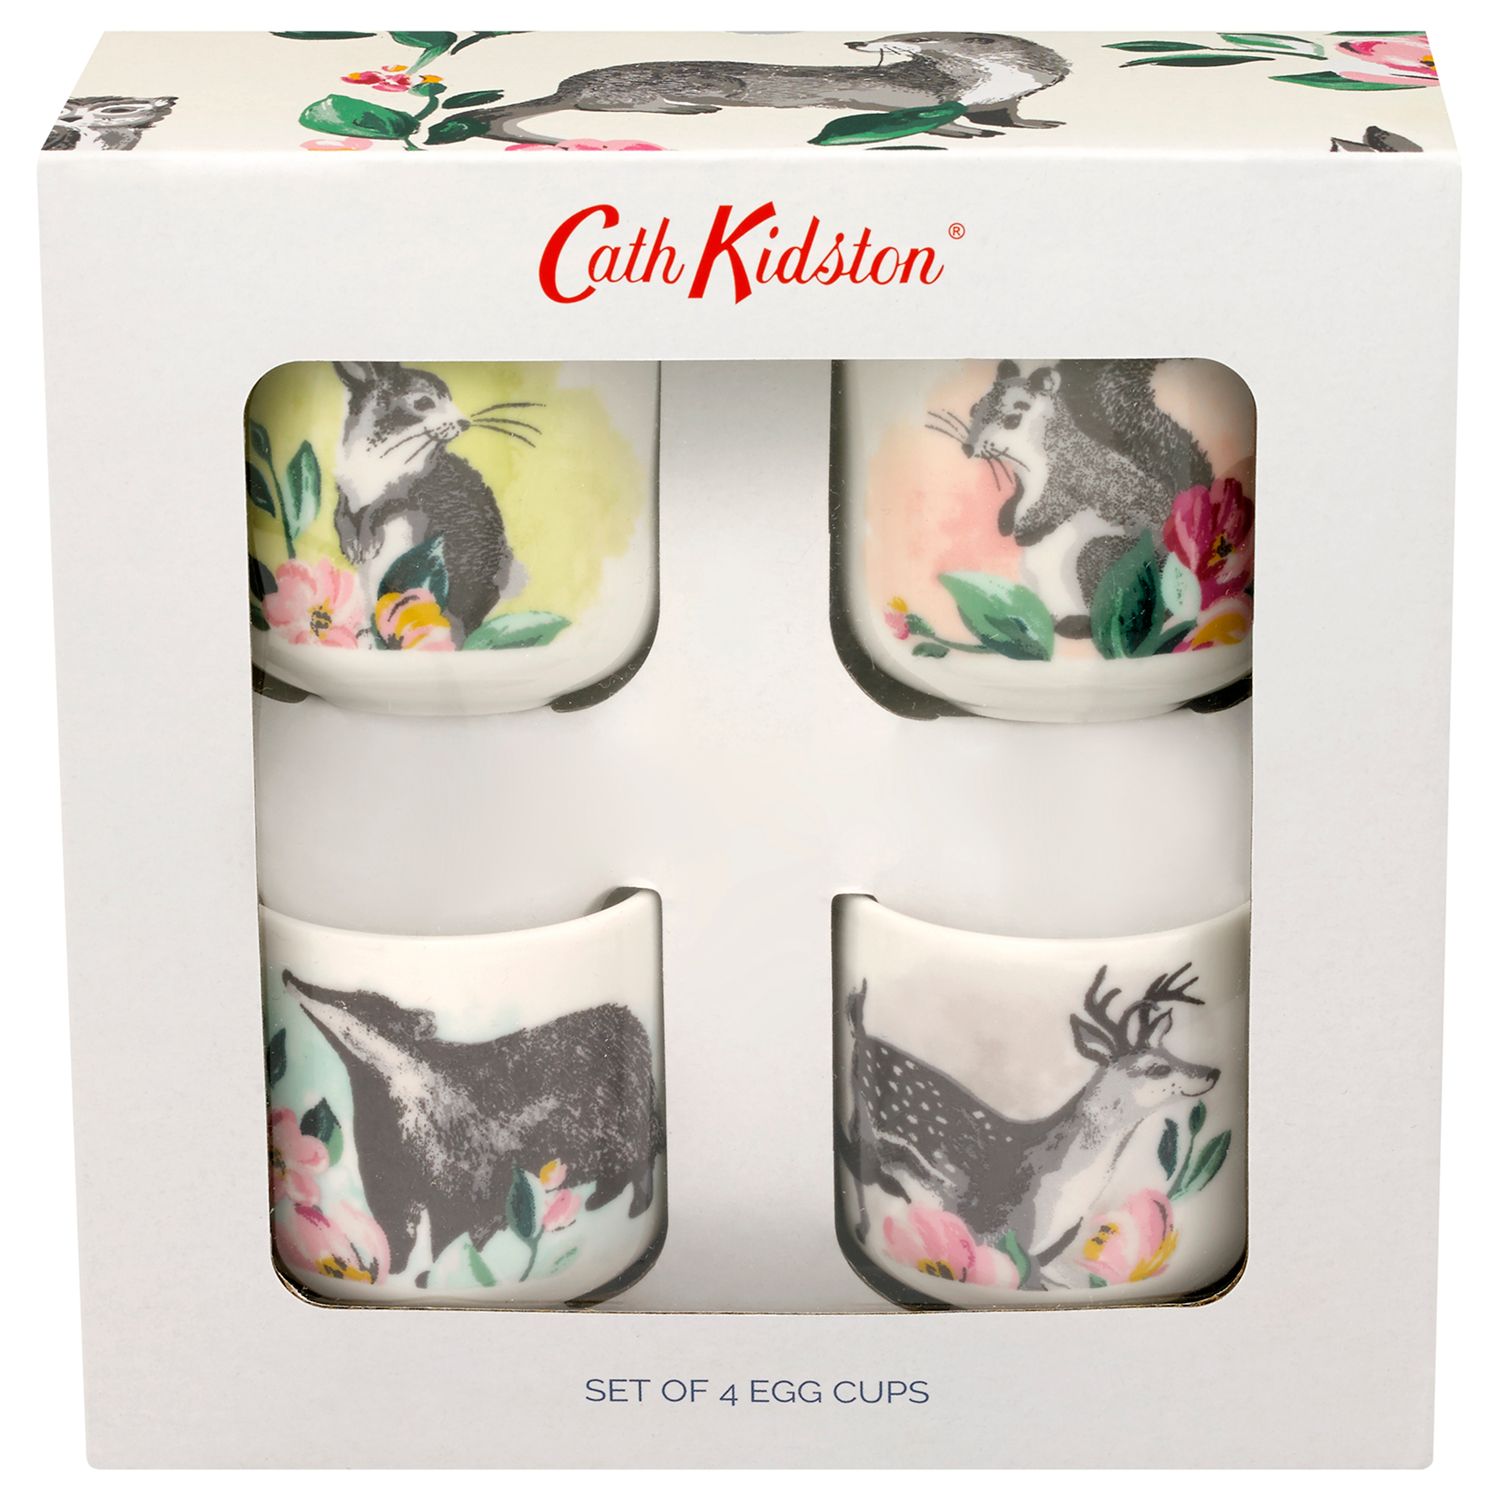 cath kidston badger and friends